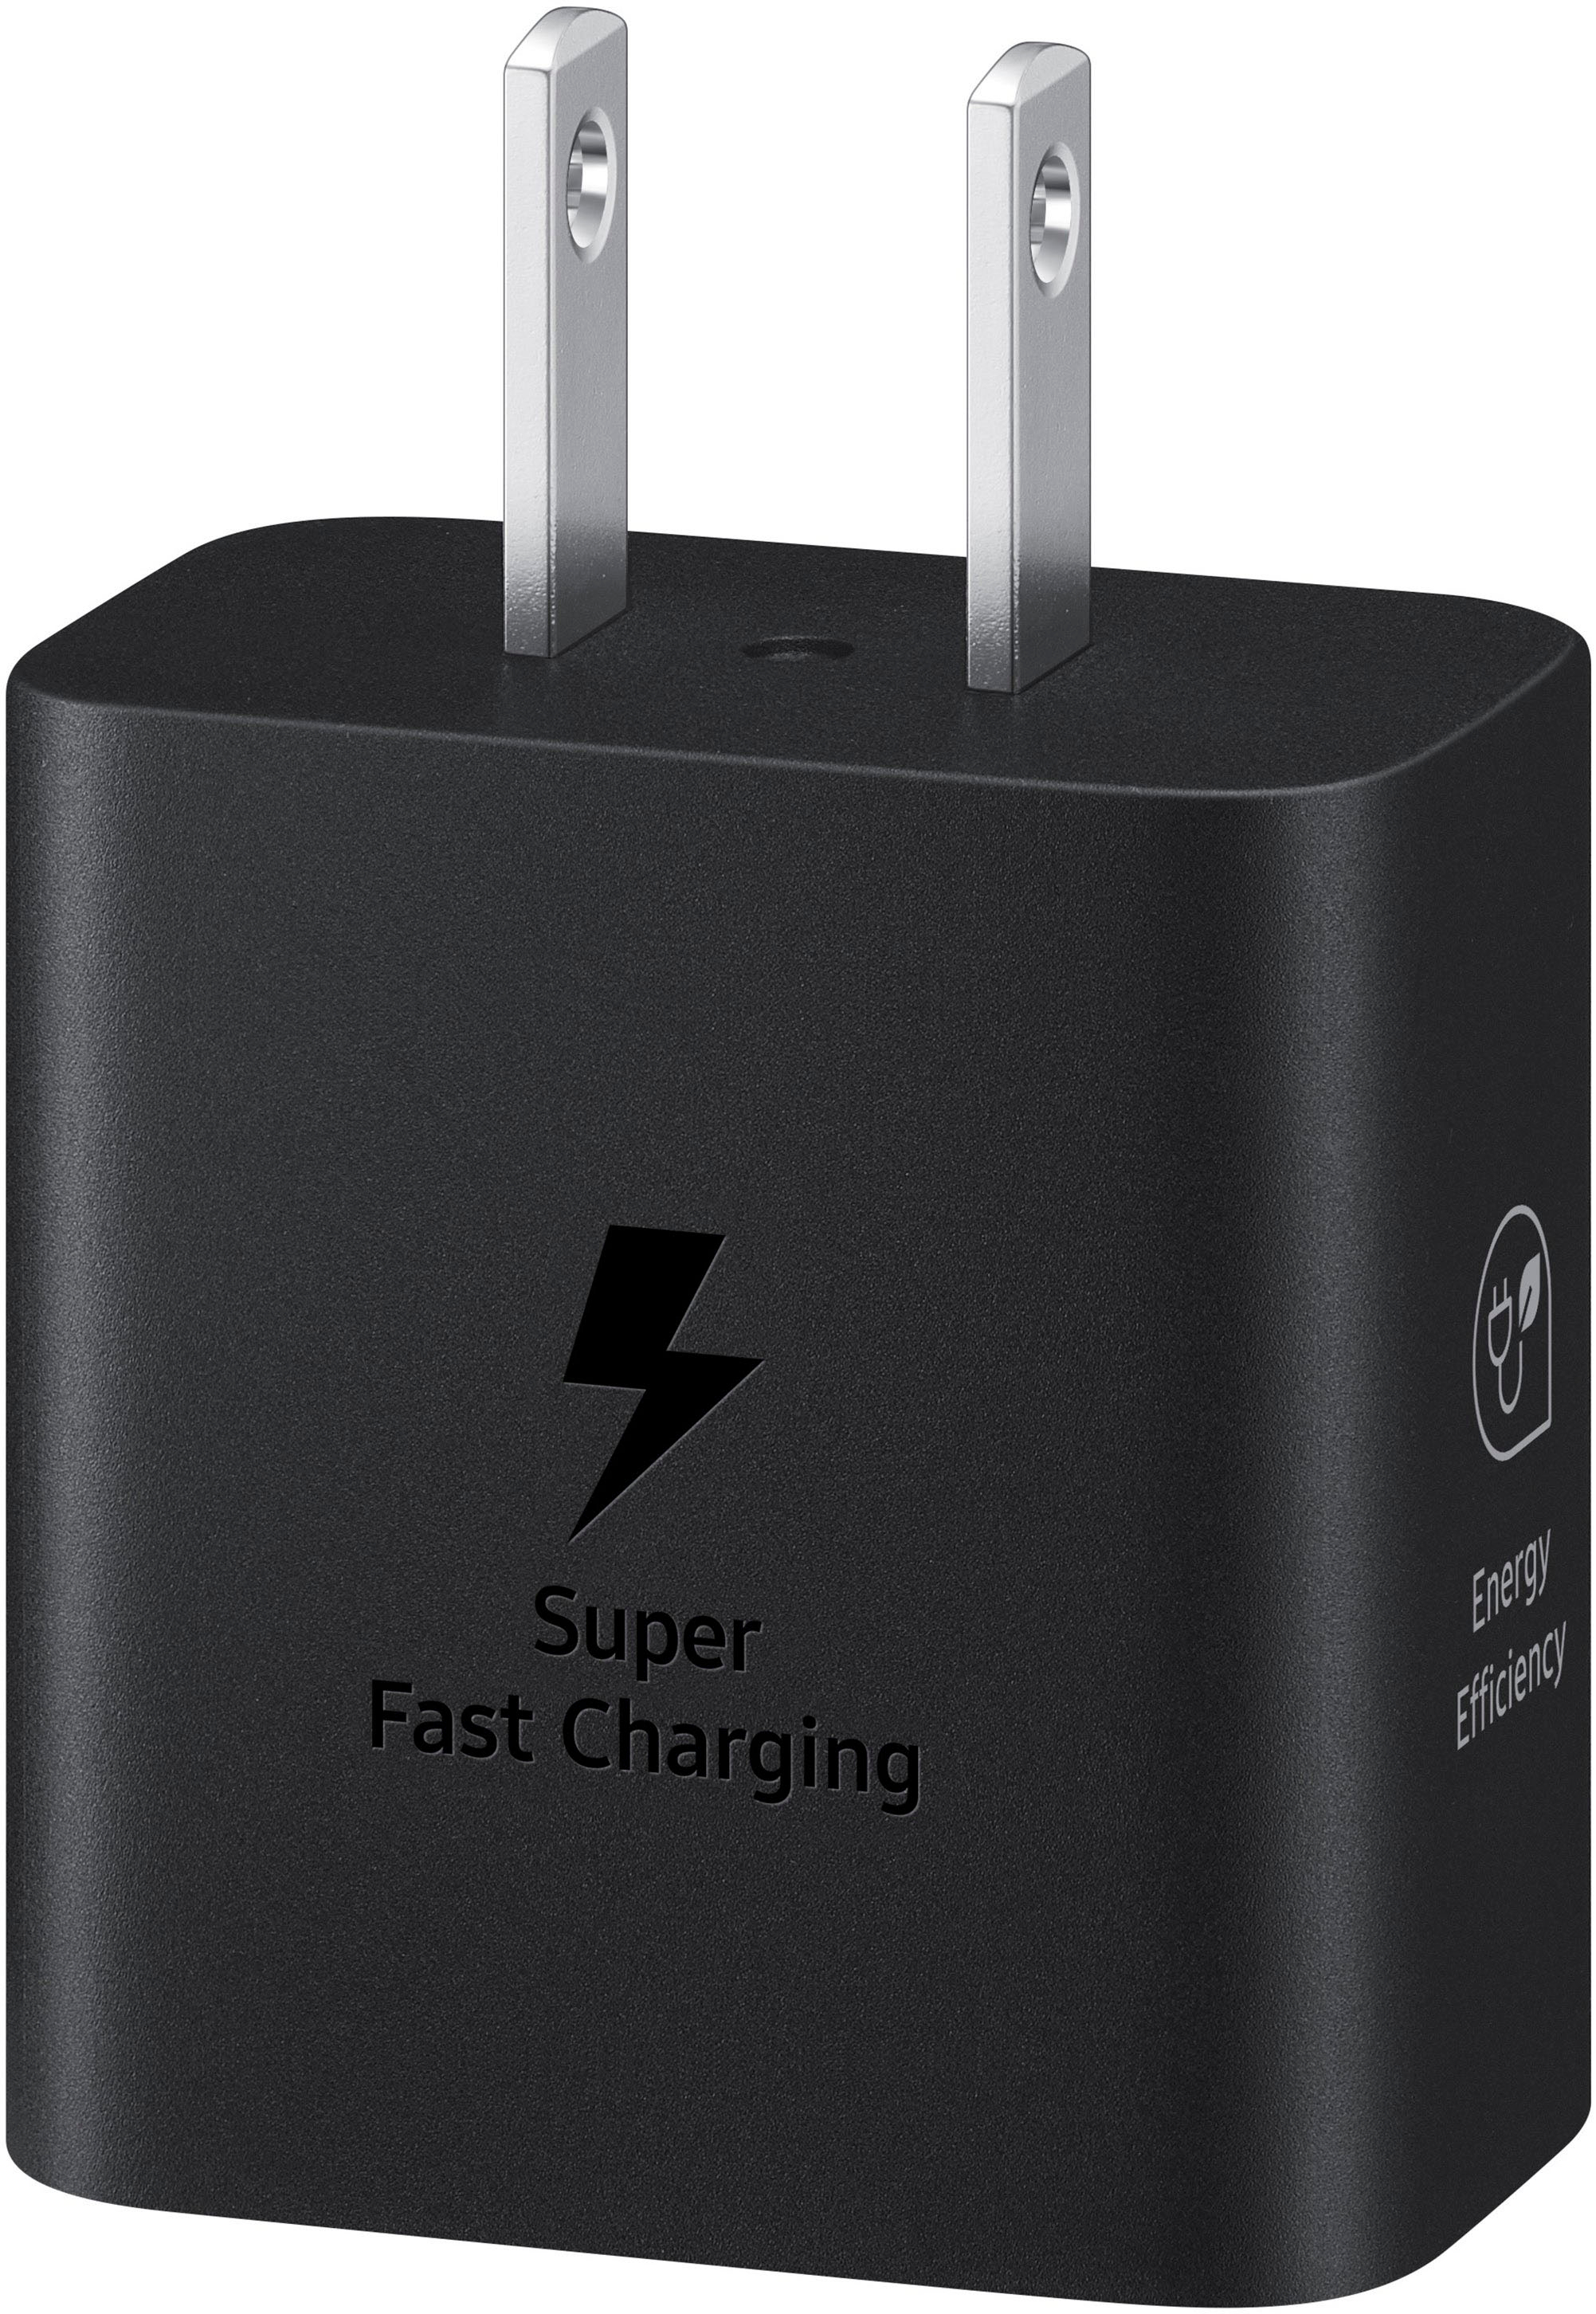 Samsung 25W Super Fast Charging Wall Charger with USB-C Cable Black  EP-T2510XBEGUS - Best Buy